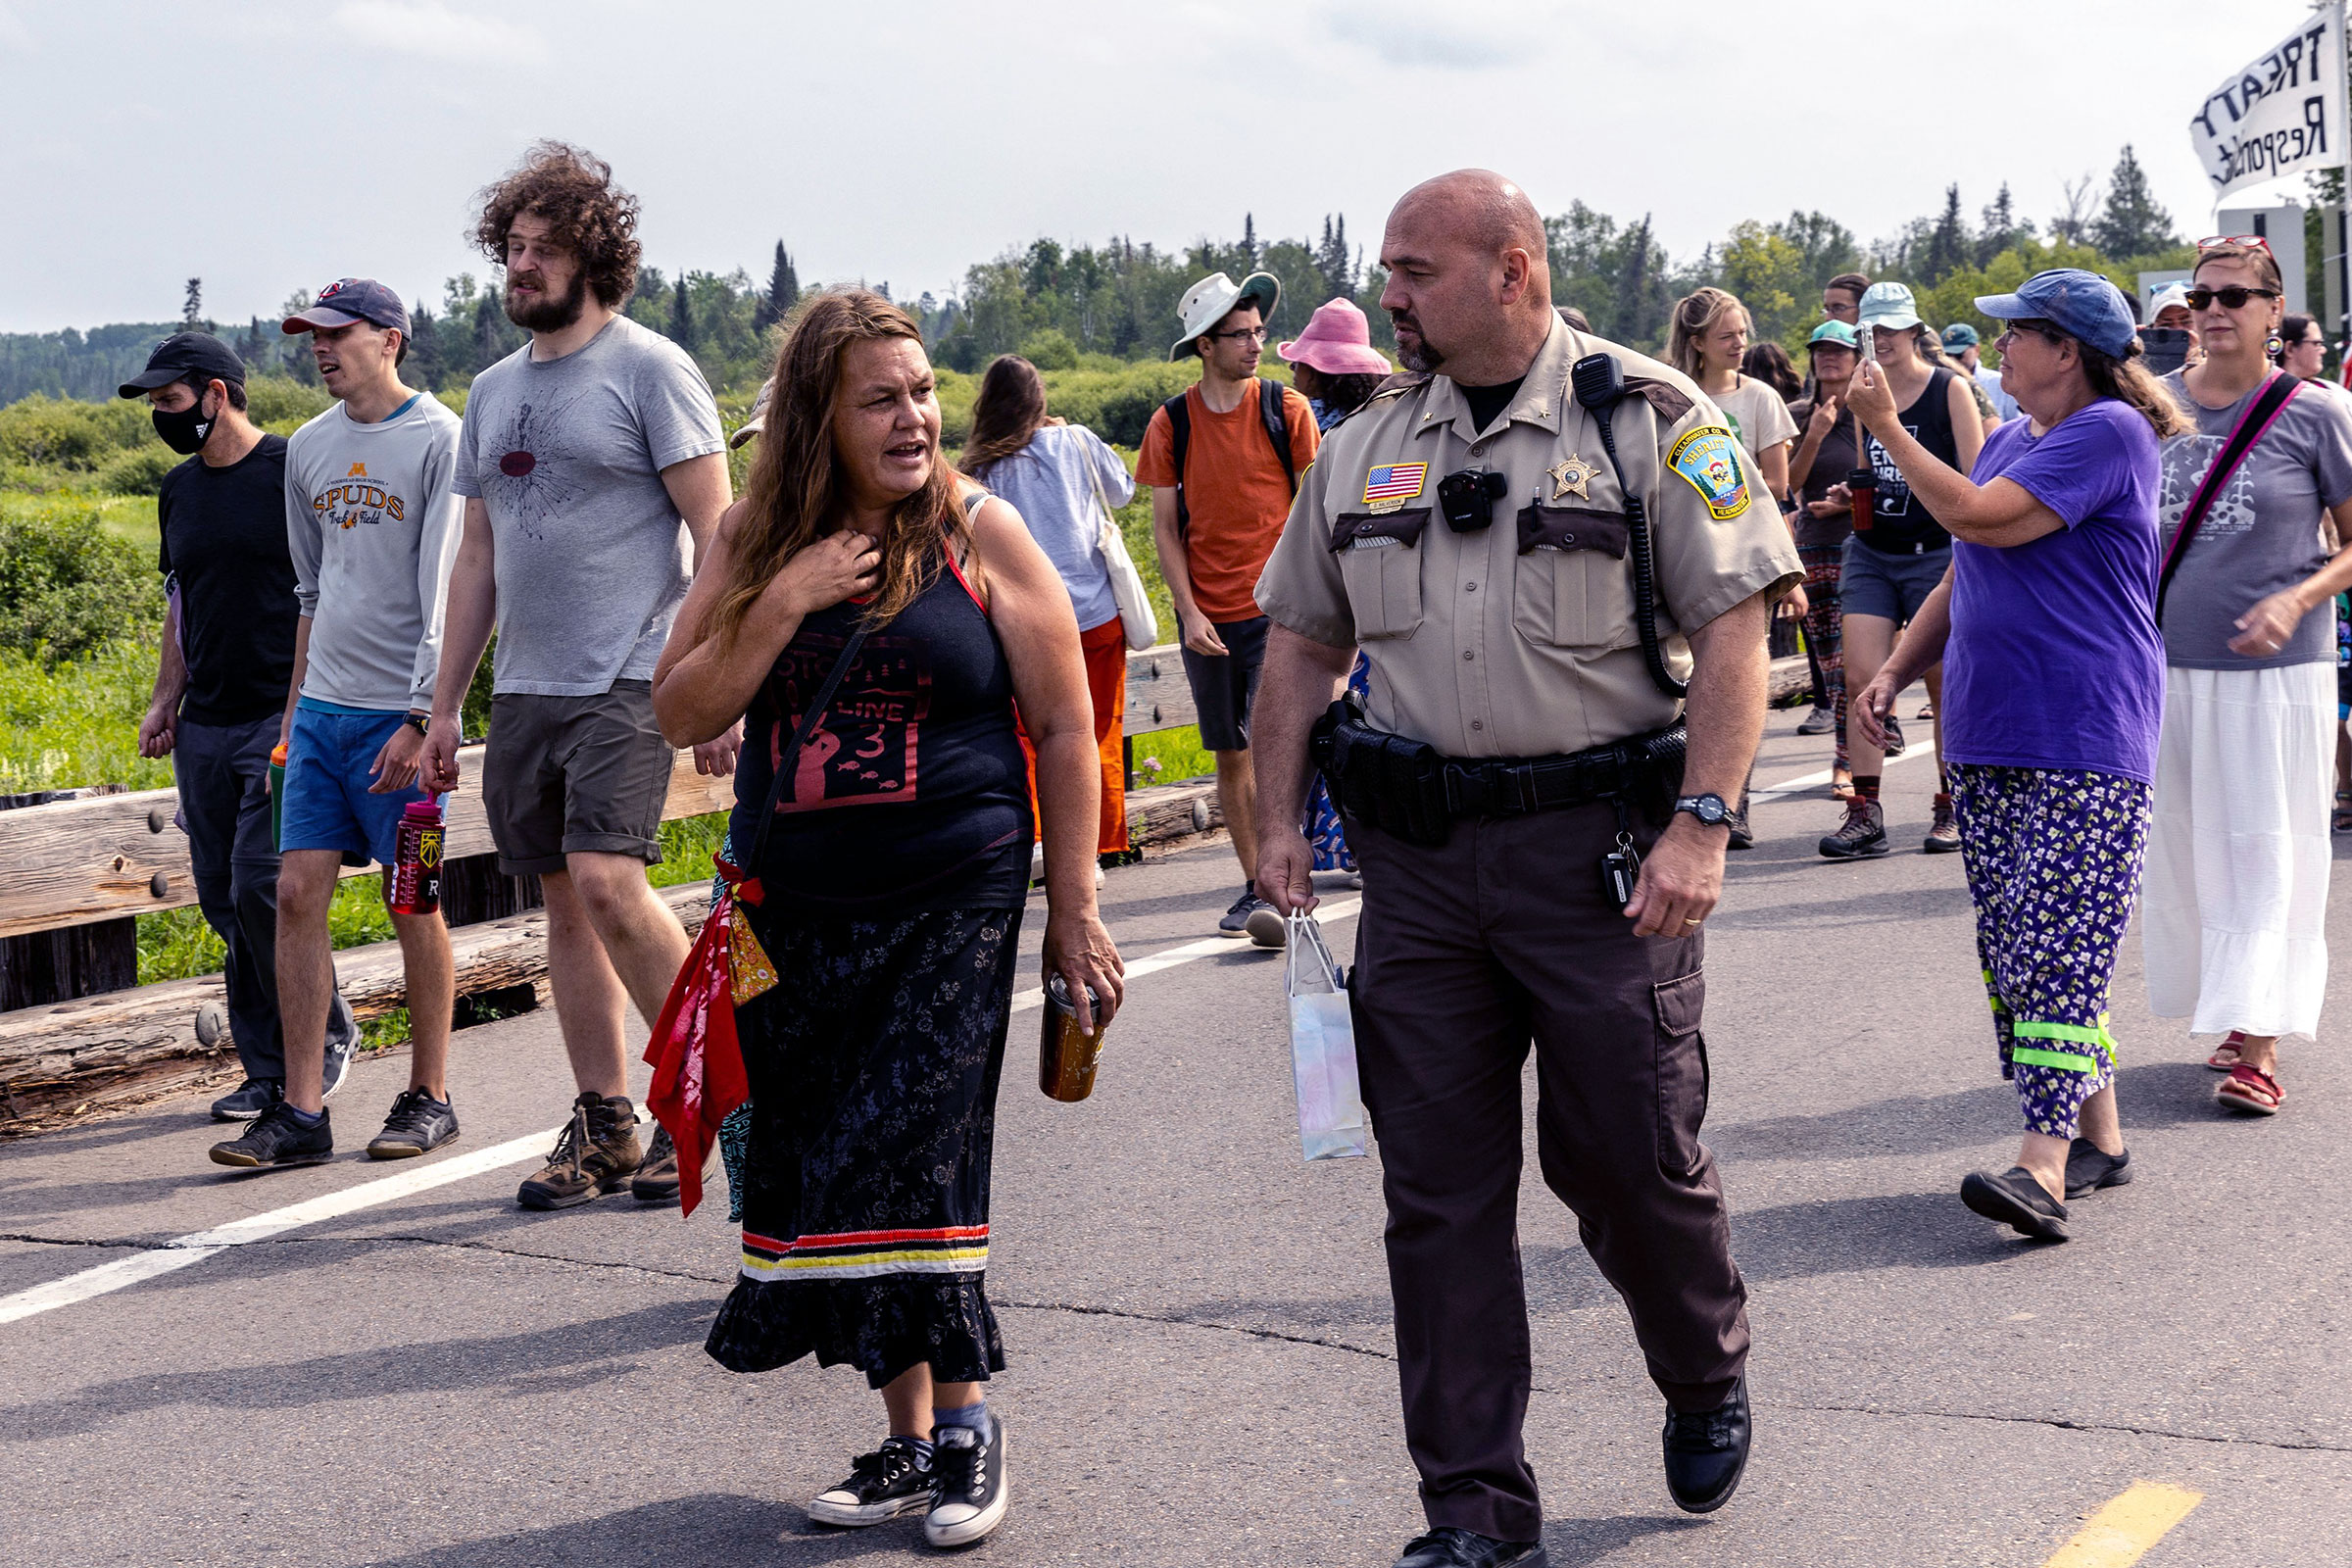 A woman speaks with a ranger as she participates in a protest on a road